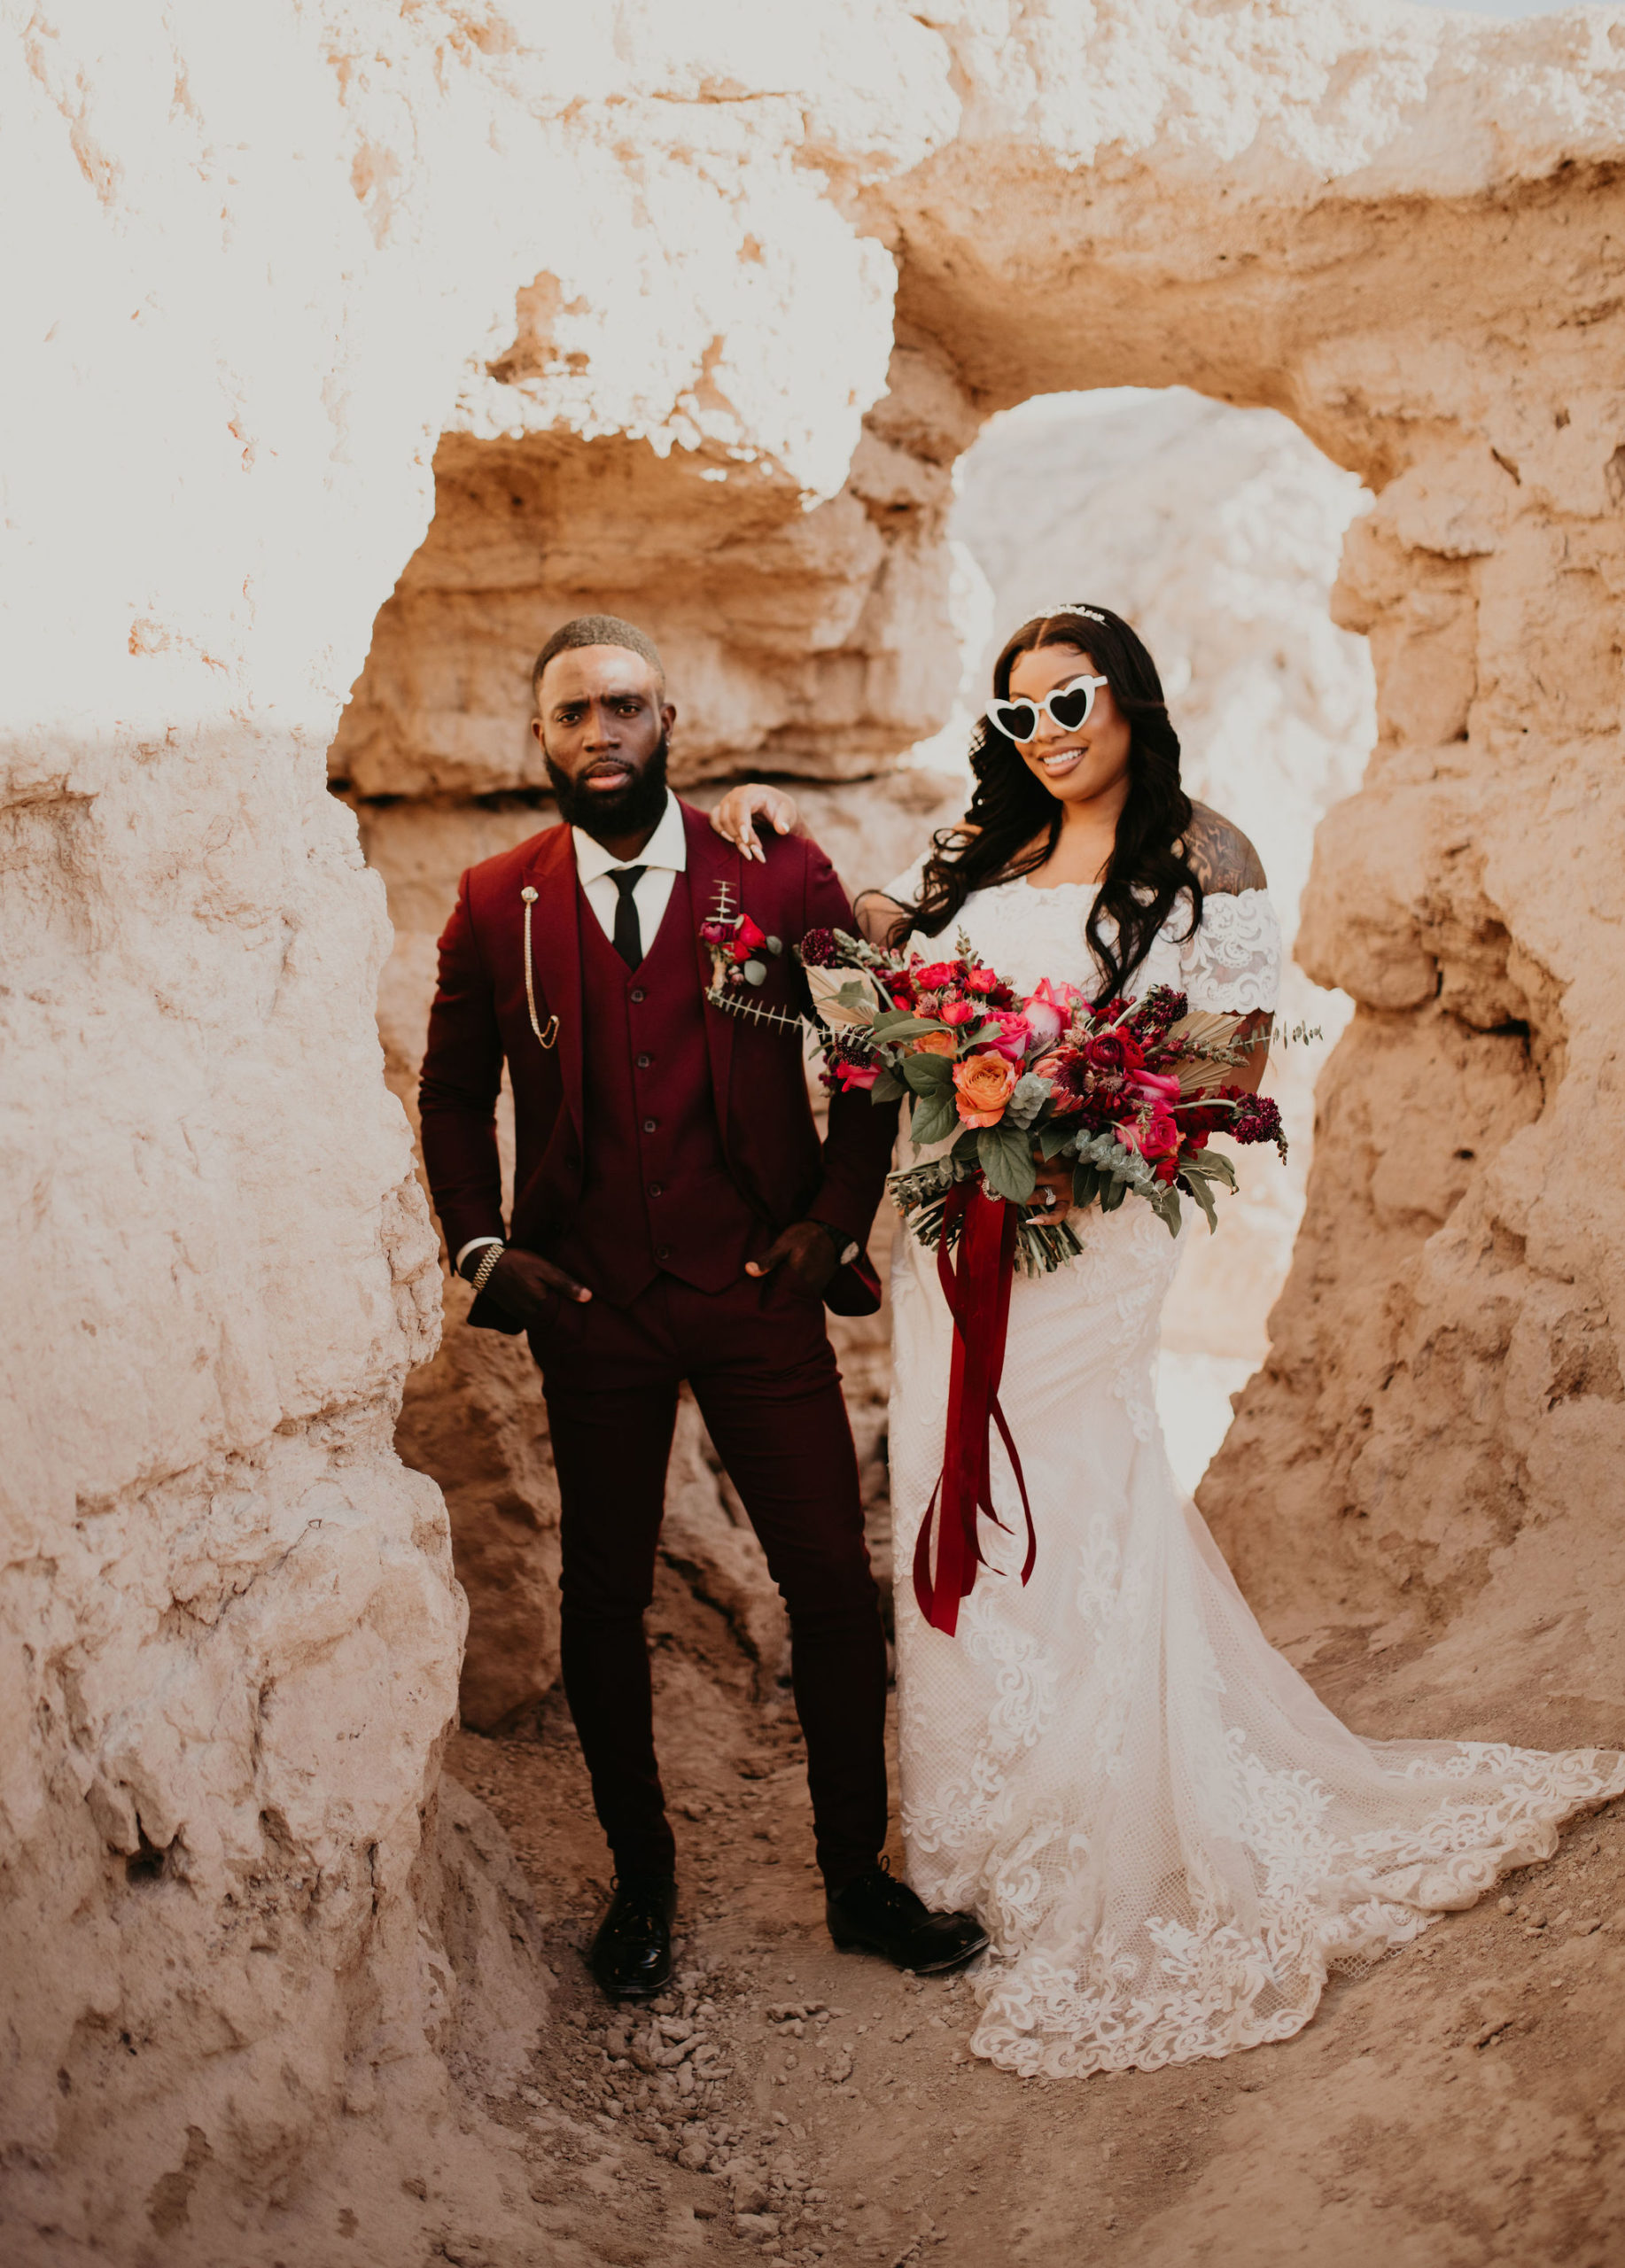 Groom & Bride with White Heart Shaped Sunglasses 